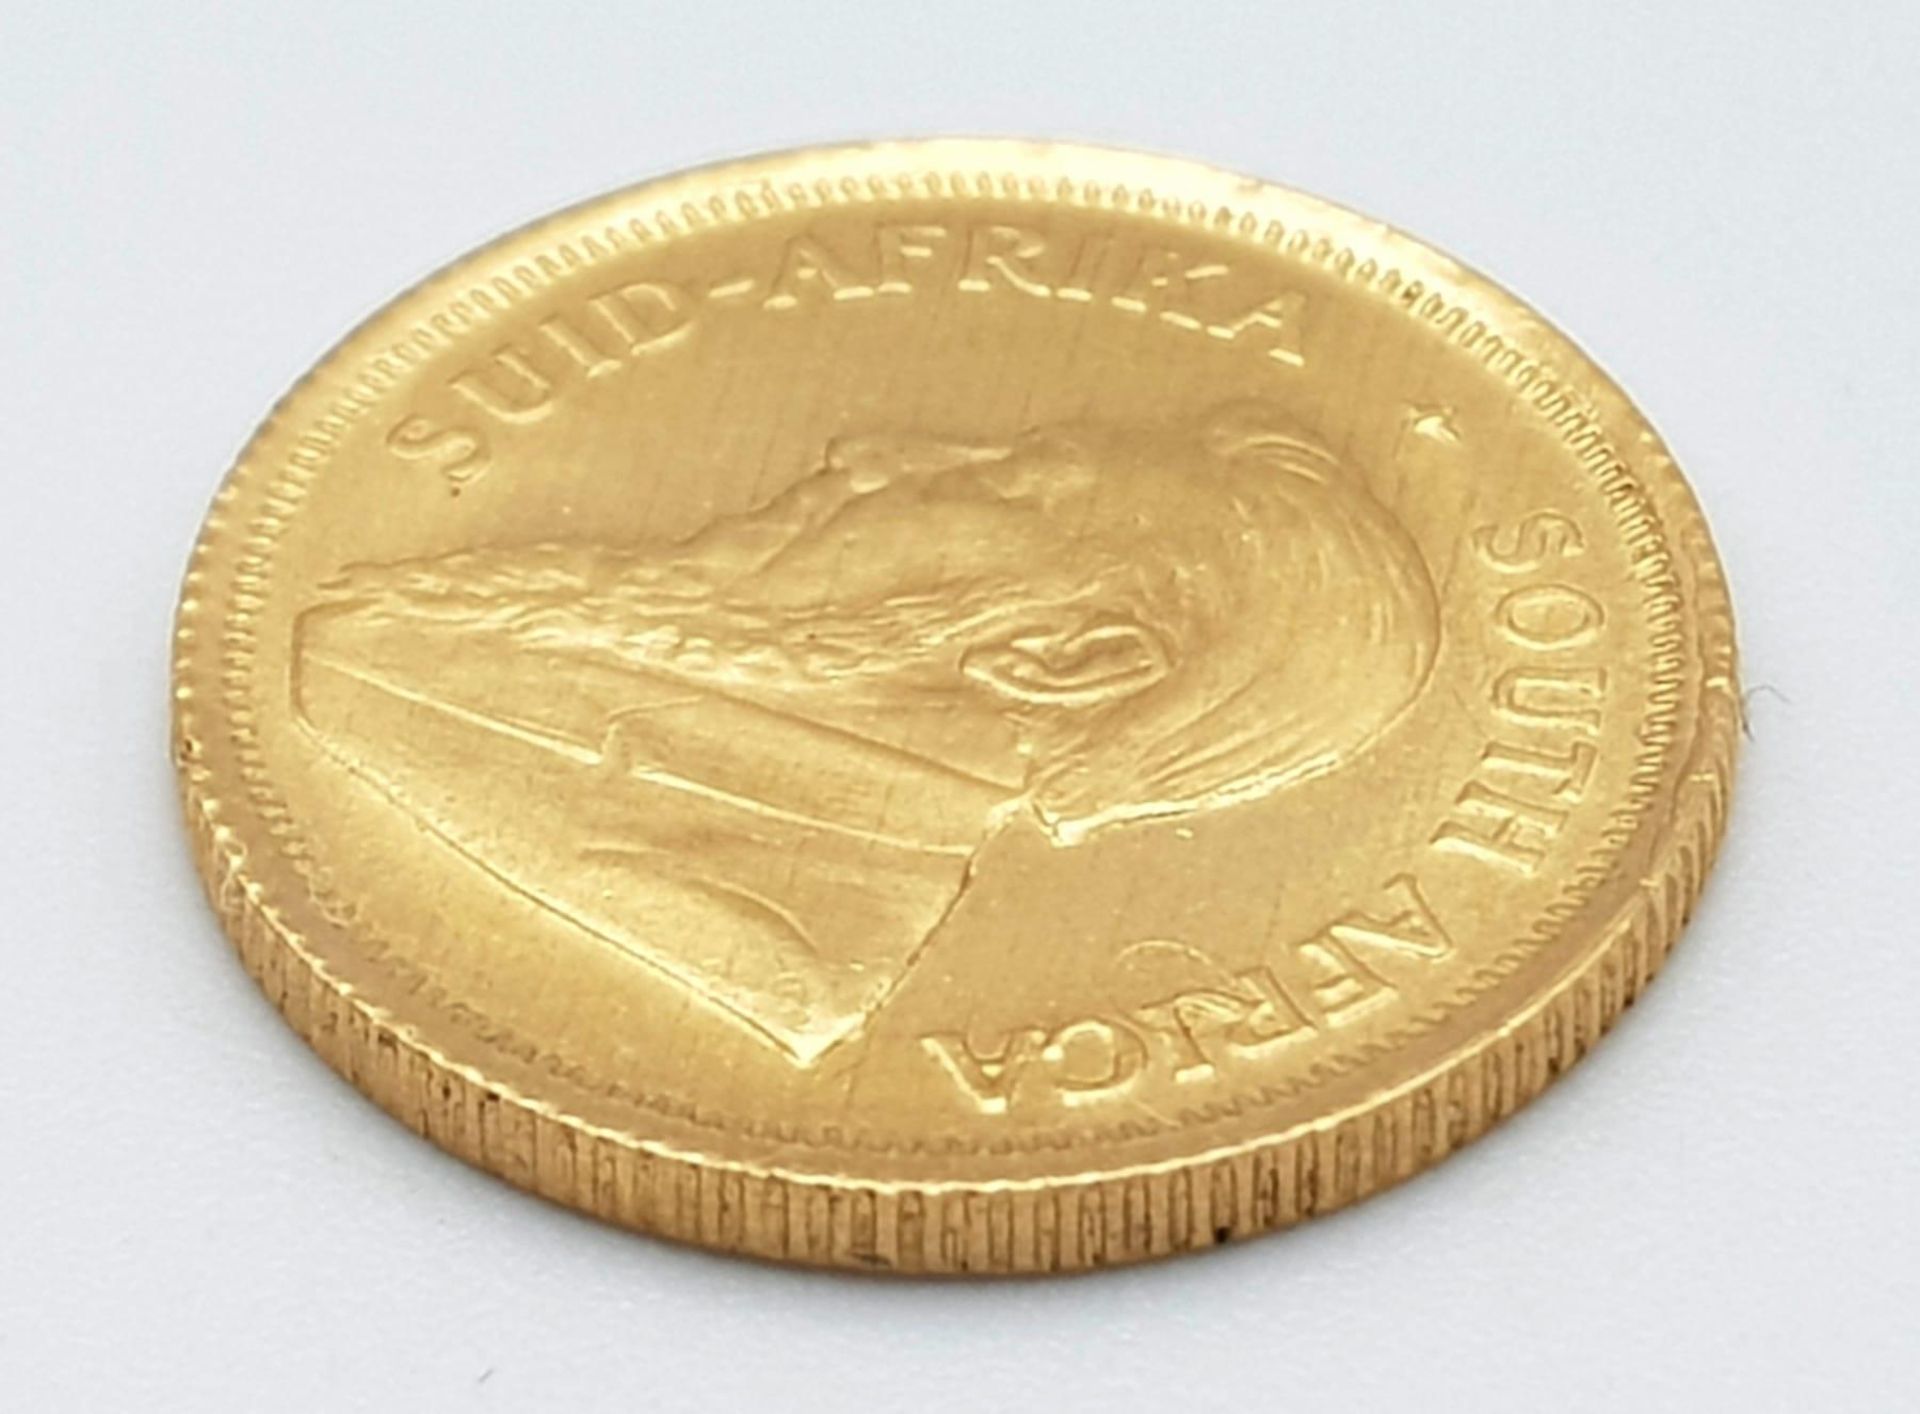 A 1/10 Ounce 22k Gold Krugerrand Coin. - Image 3 of 4